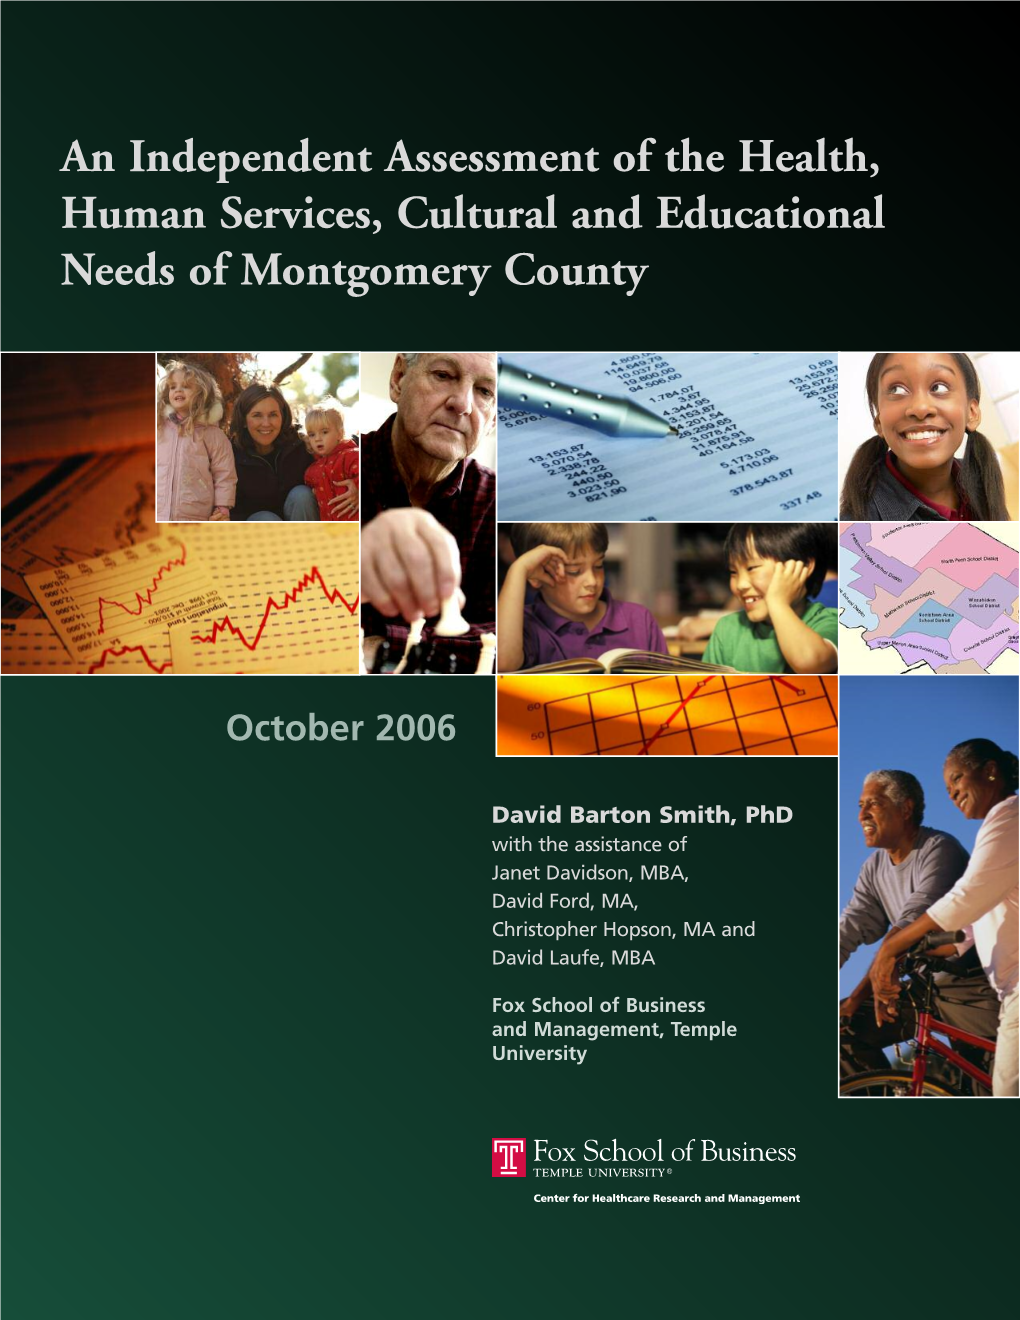 An Independent Assessment of the Health, Human Services, Cultural and Educational Needs of Montgomery County